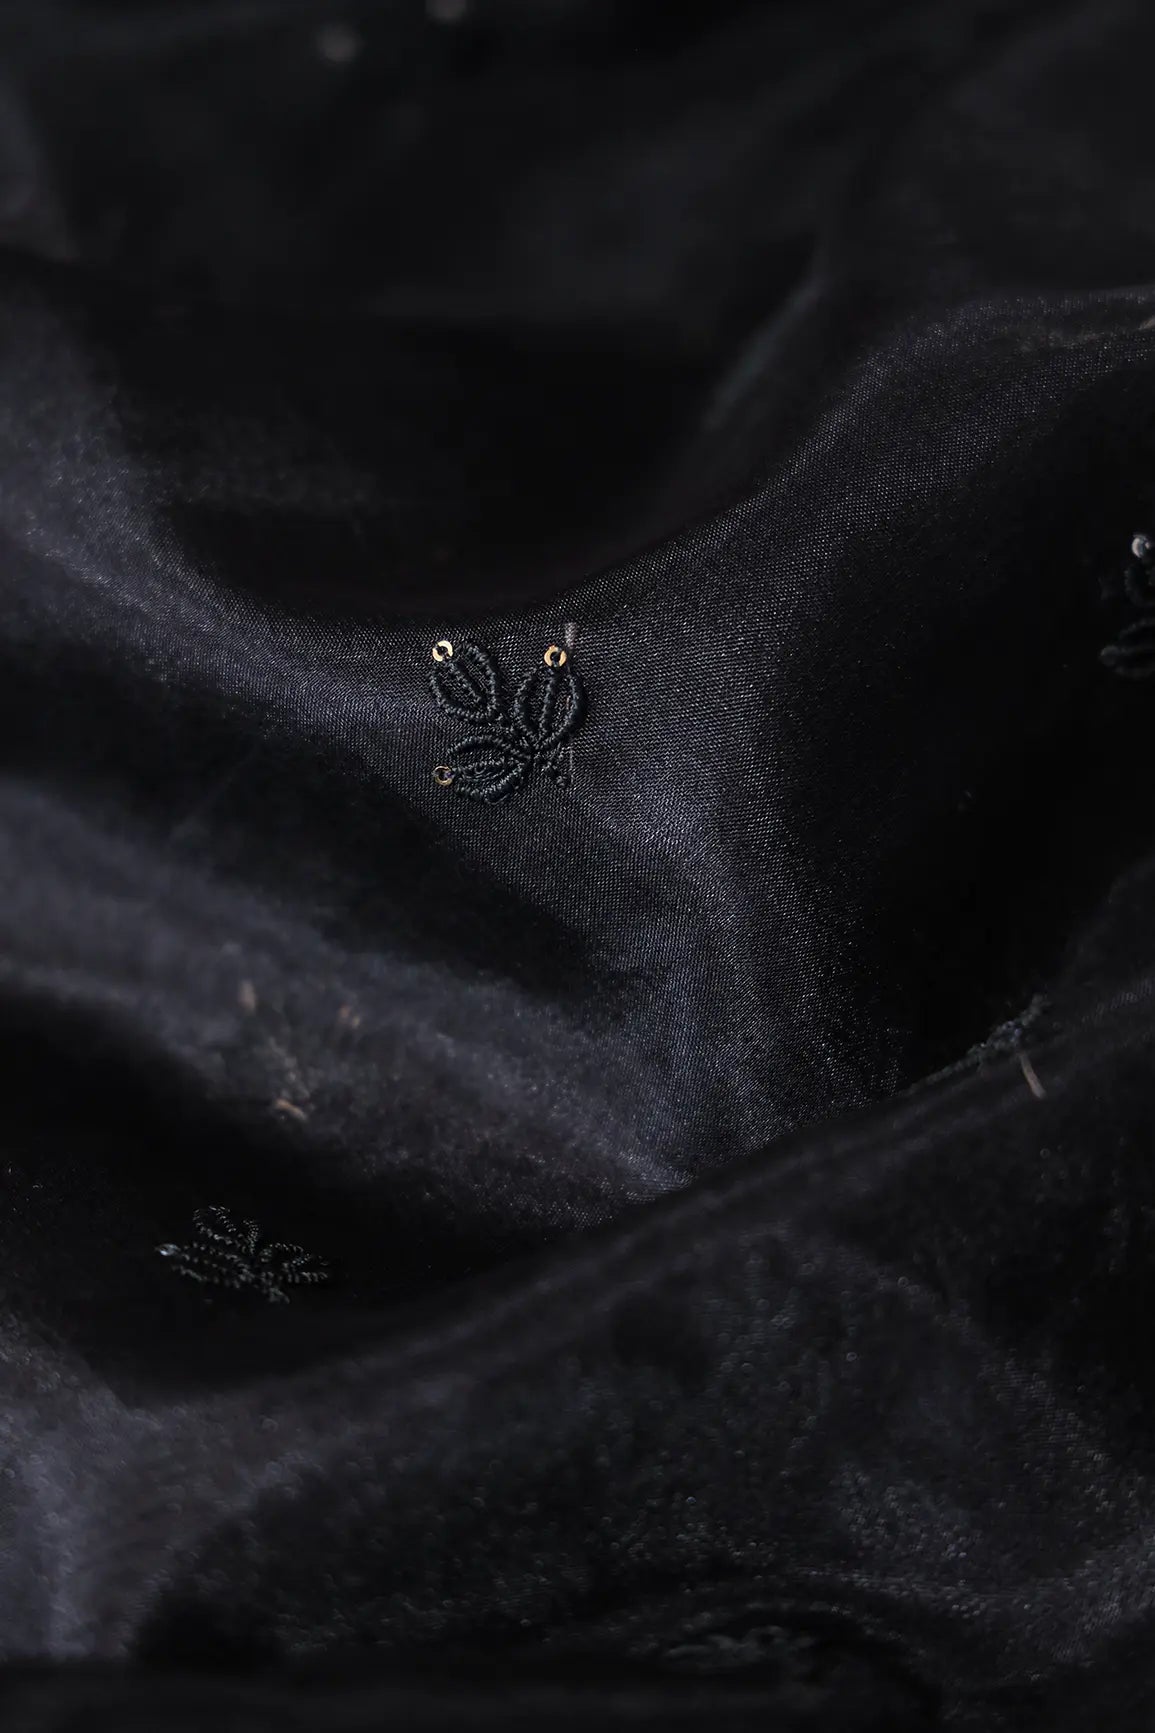 Black Thread With Sequins Beautiful Small Leafy Embroidery Work On Black Organza Fabric - doeraa